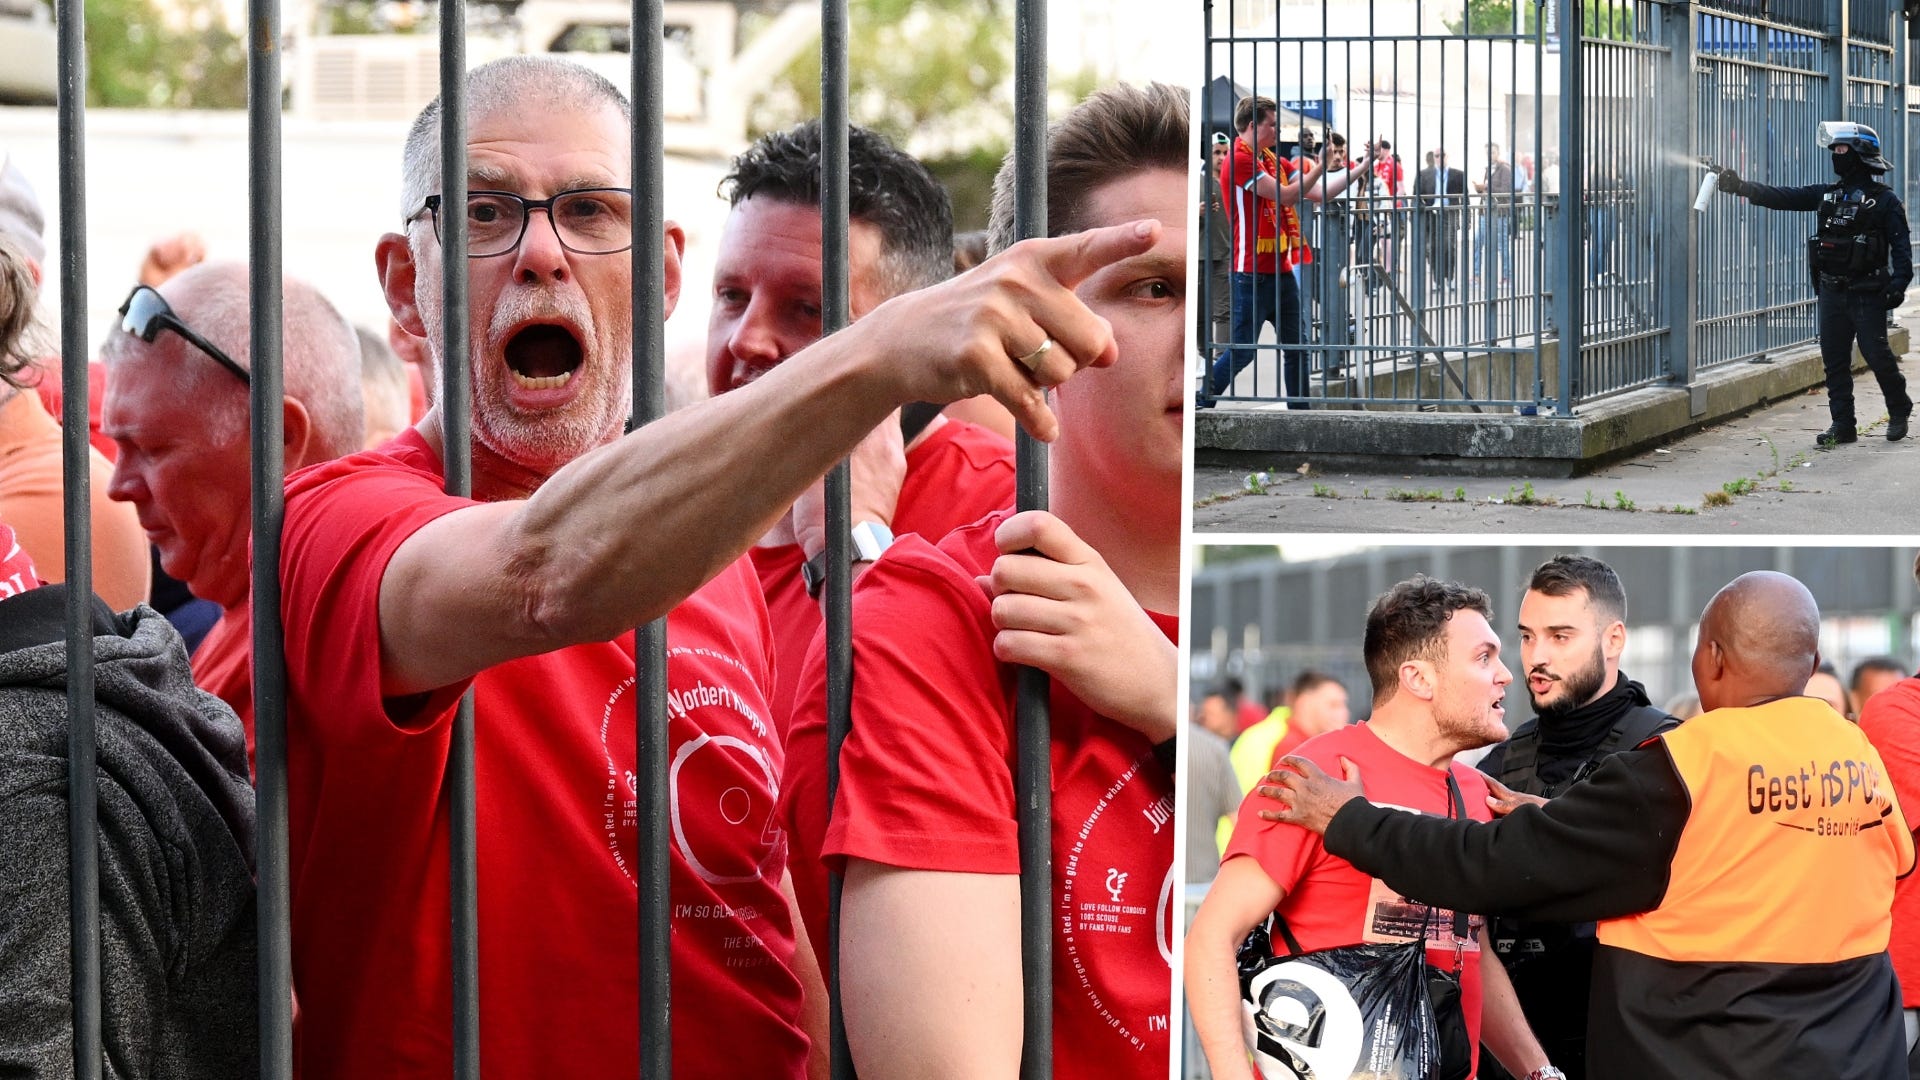 We will not let this lie' - Liverpool and fans still 'fighting for justice' after Champions League final debacle | Goal.com